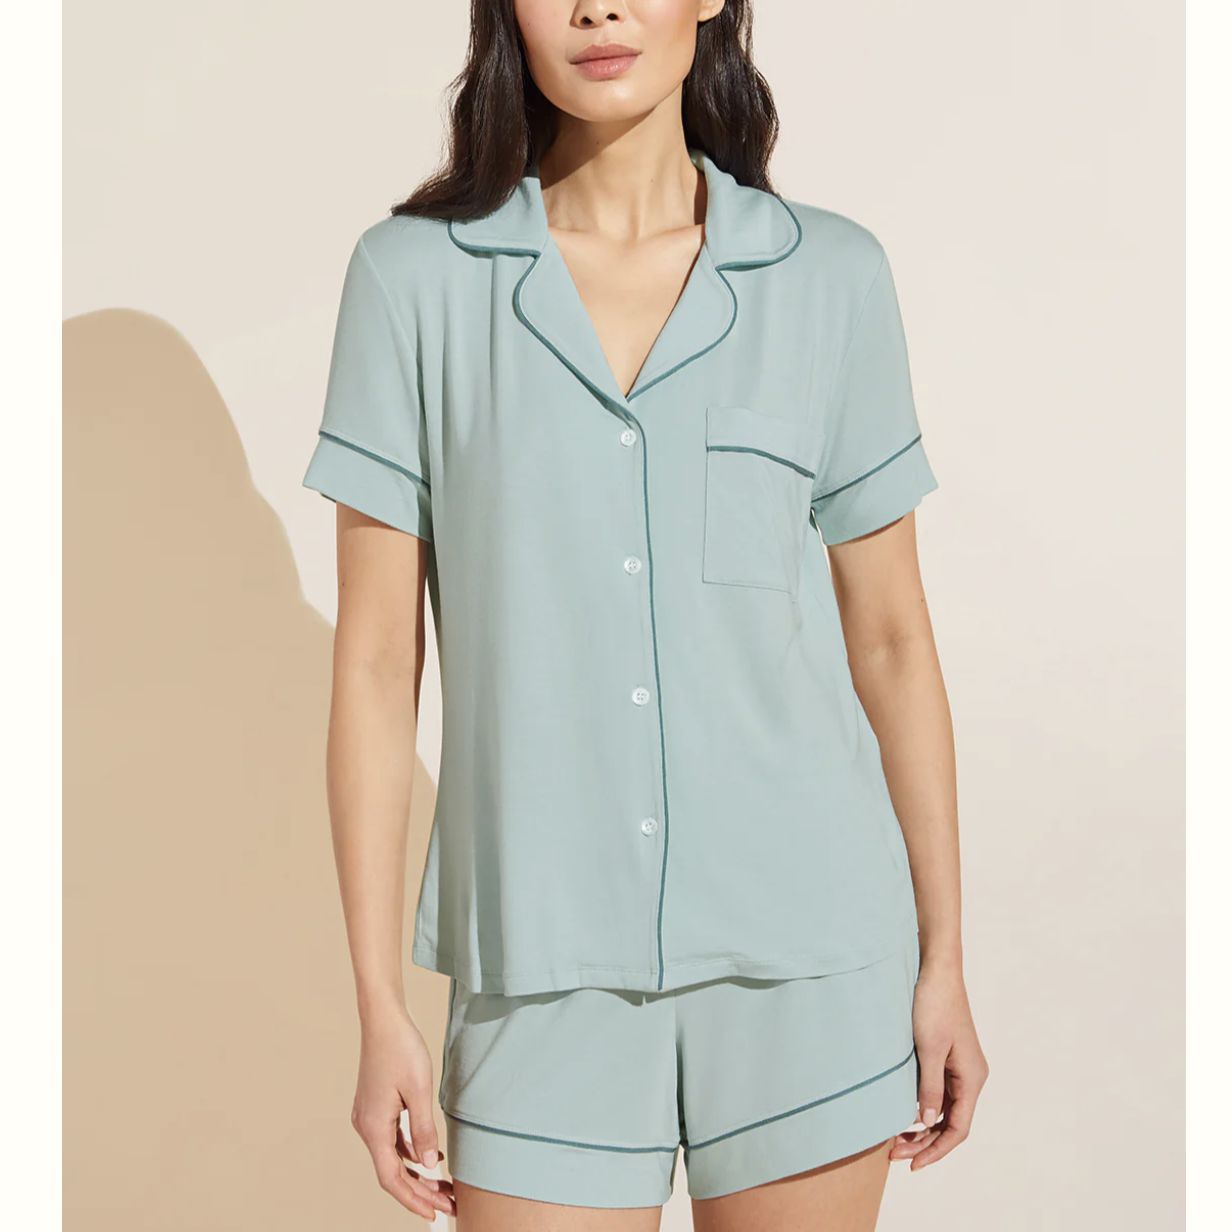 Eberjey Gisele Relaxed Short PJ Set PJ1018N in Surf Spray/Agave-Loungewear-Eberjey-Surf Spray/Agave-Small-Anna Bella Fine Lingerie, Reveal Your Most Gorgeous Self!